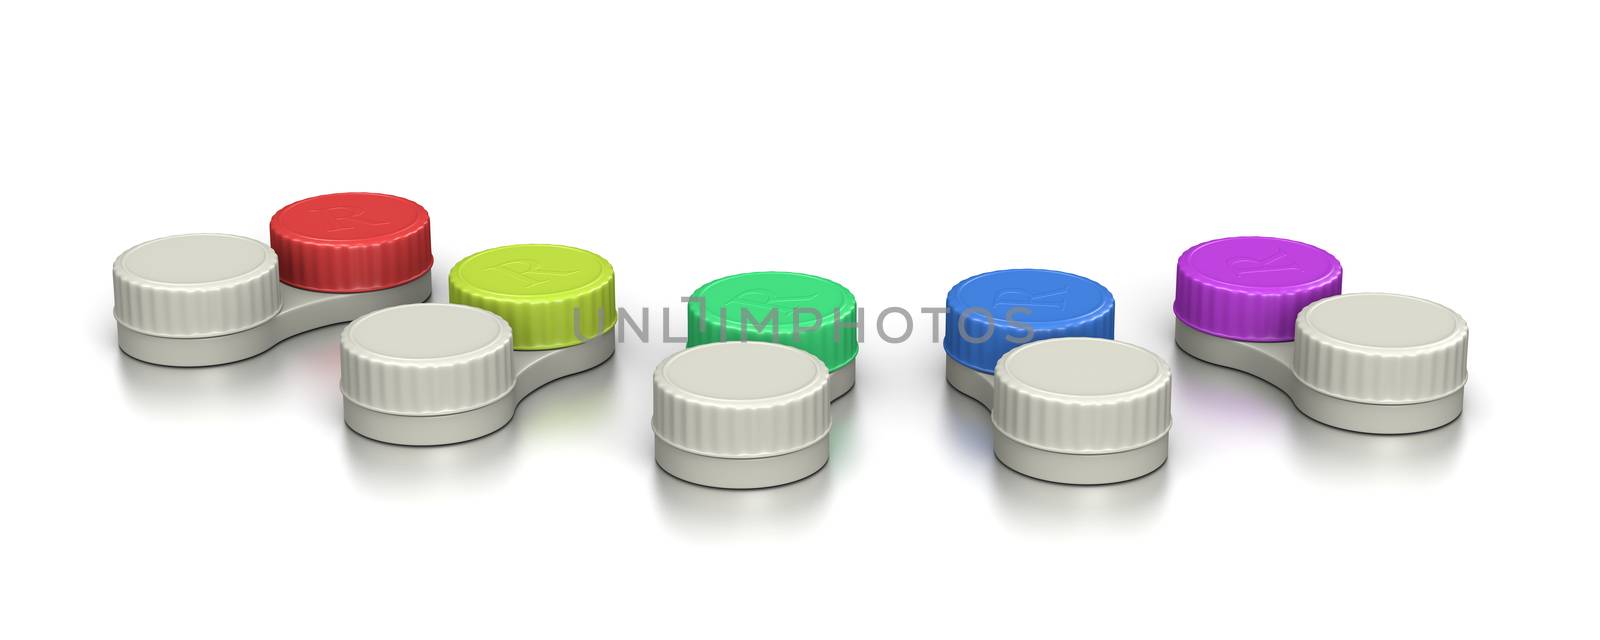 Contact Lens Containers Set by make